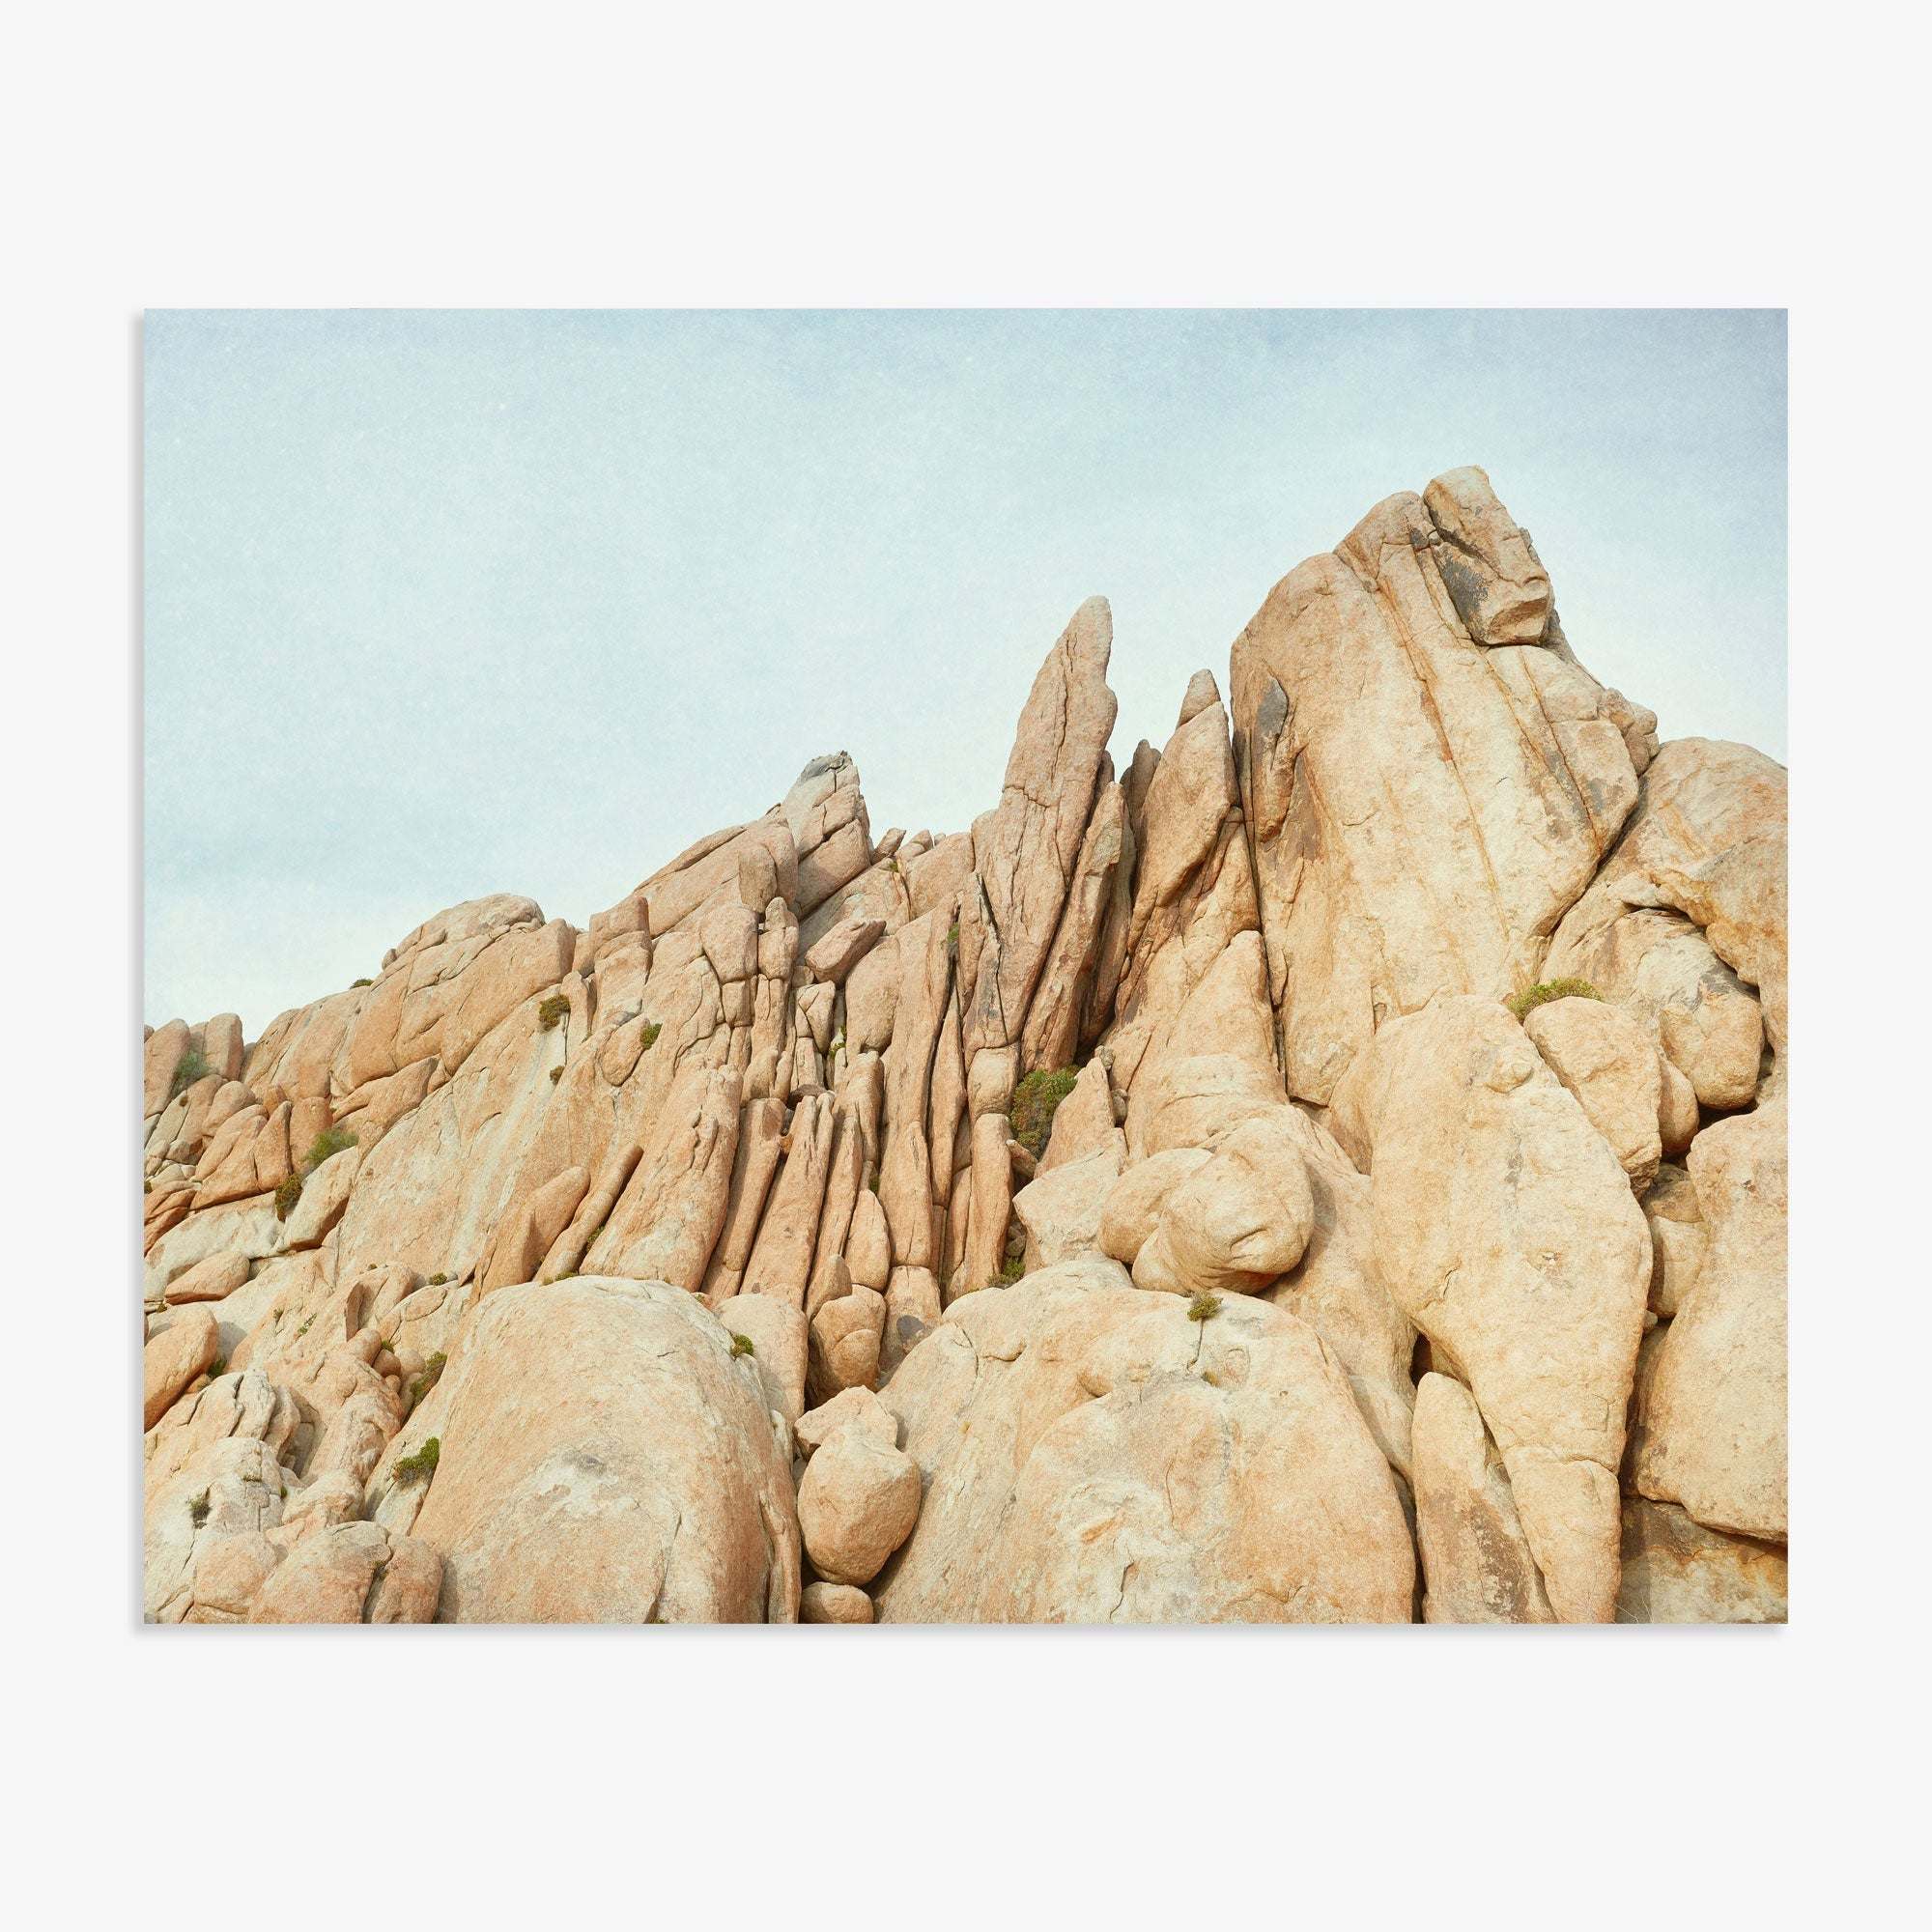 Rugged and textured rock formations in Joshua Tree rise steeply under a clear sky, with sharp peaks and large, rounded boulders covering the landscape. This scene is captured beautifully in the Offley Green &#39;Joshua Rocks&#39; print.